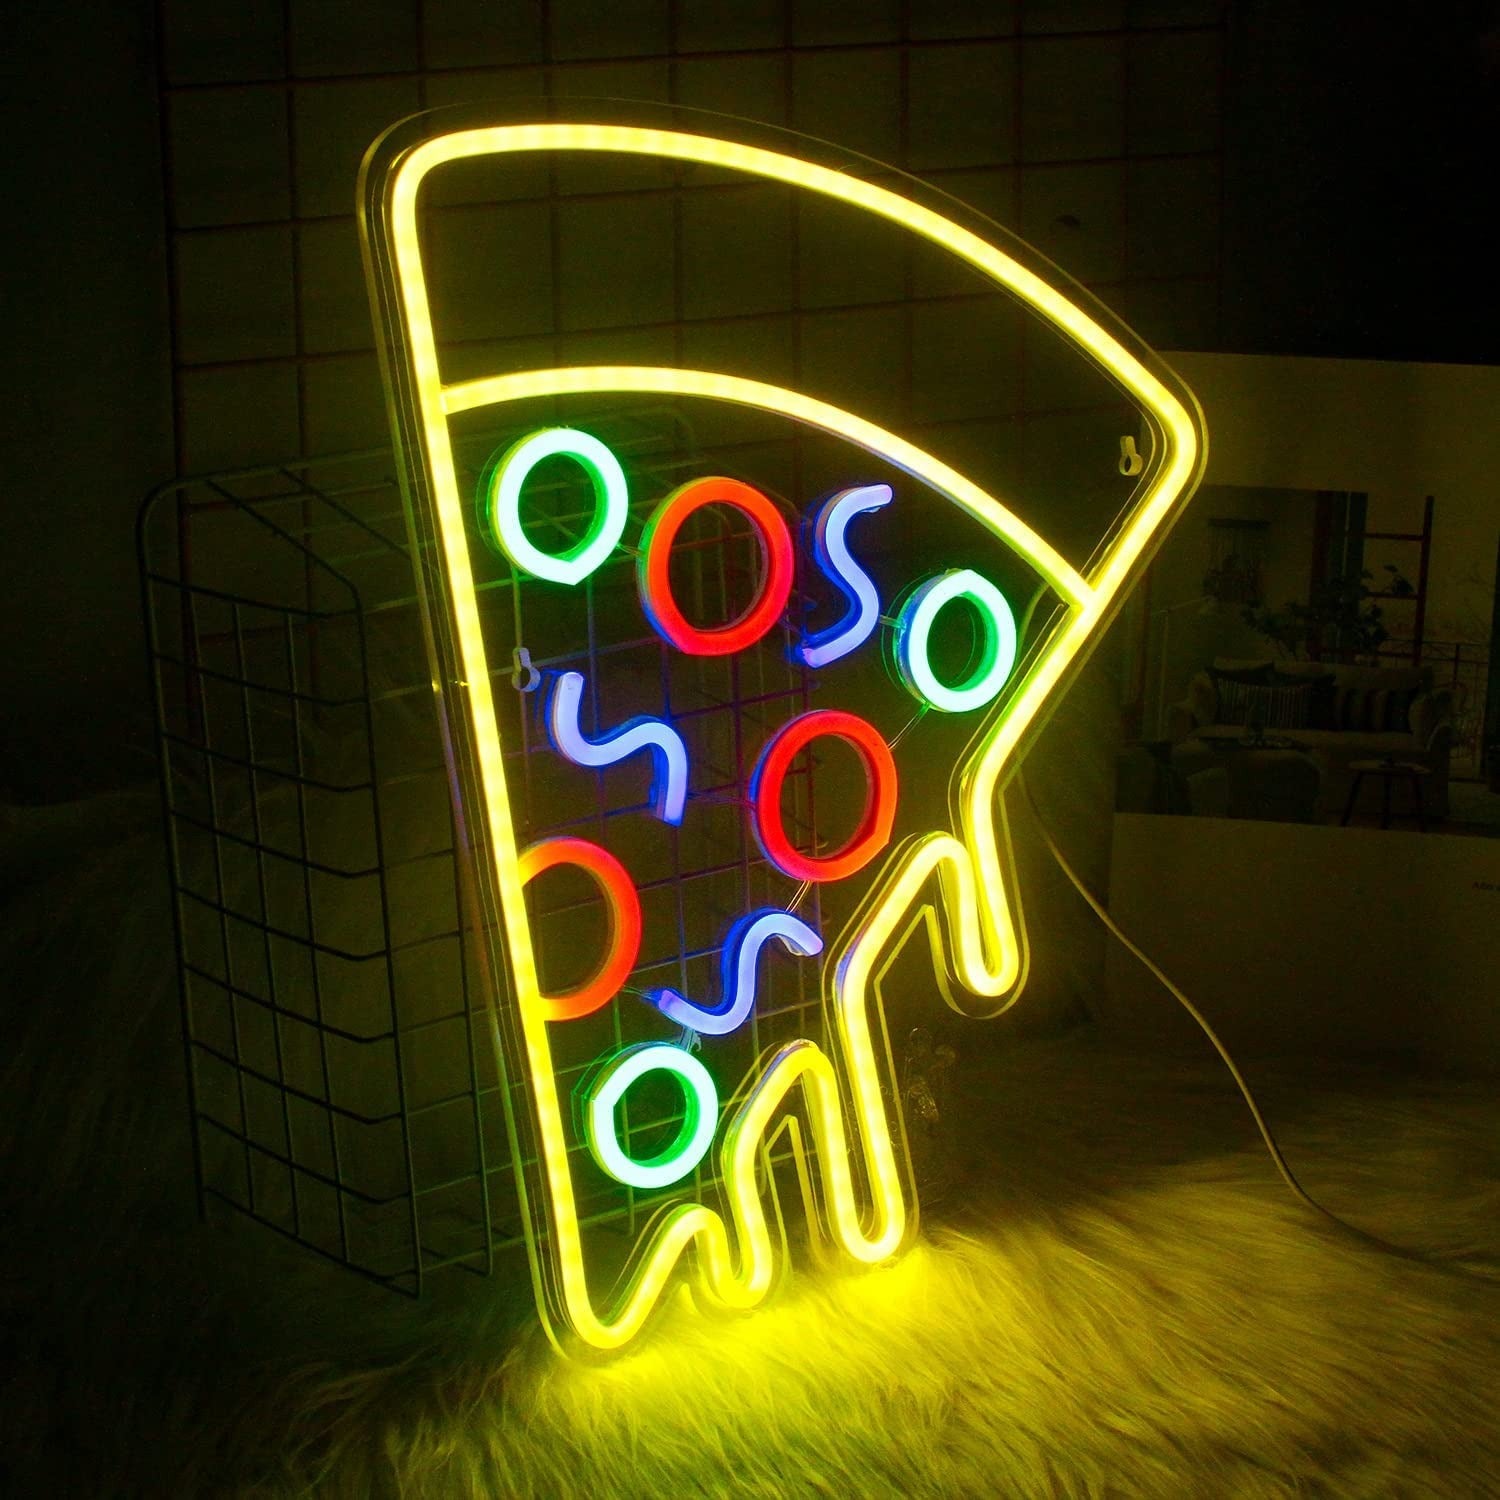 Motion-activated neon signs are designed to conserve energy